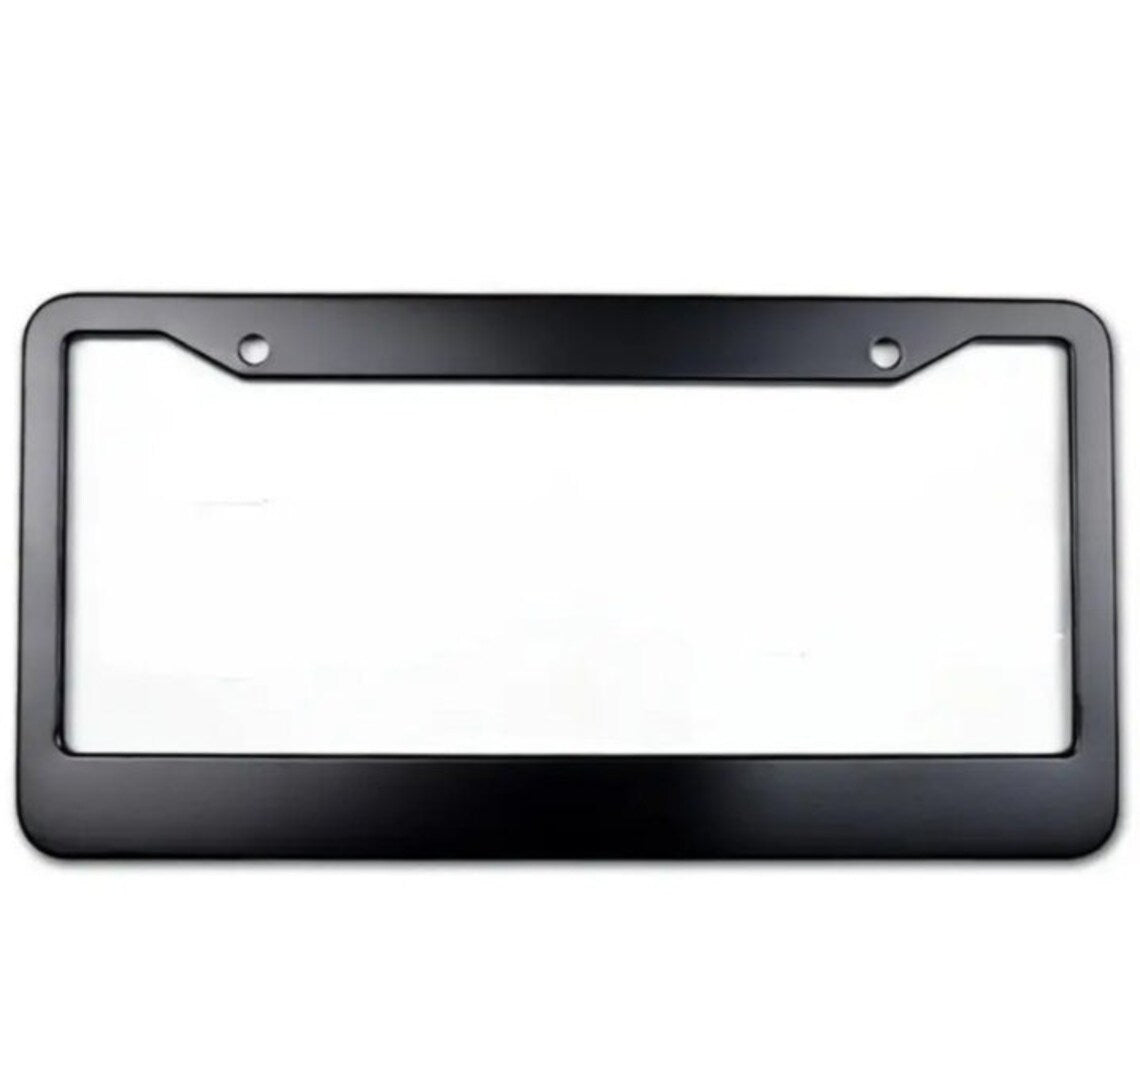 The Office Funny Black Plastic or Aluminum License Plate Frame Truck Car Van Décor Vehicle Accessories New Car Gifts Handmade Holder